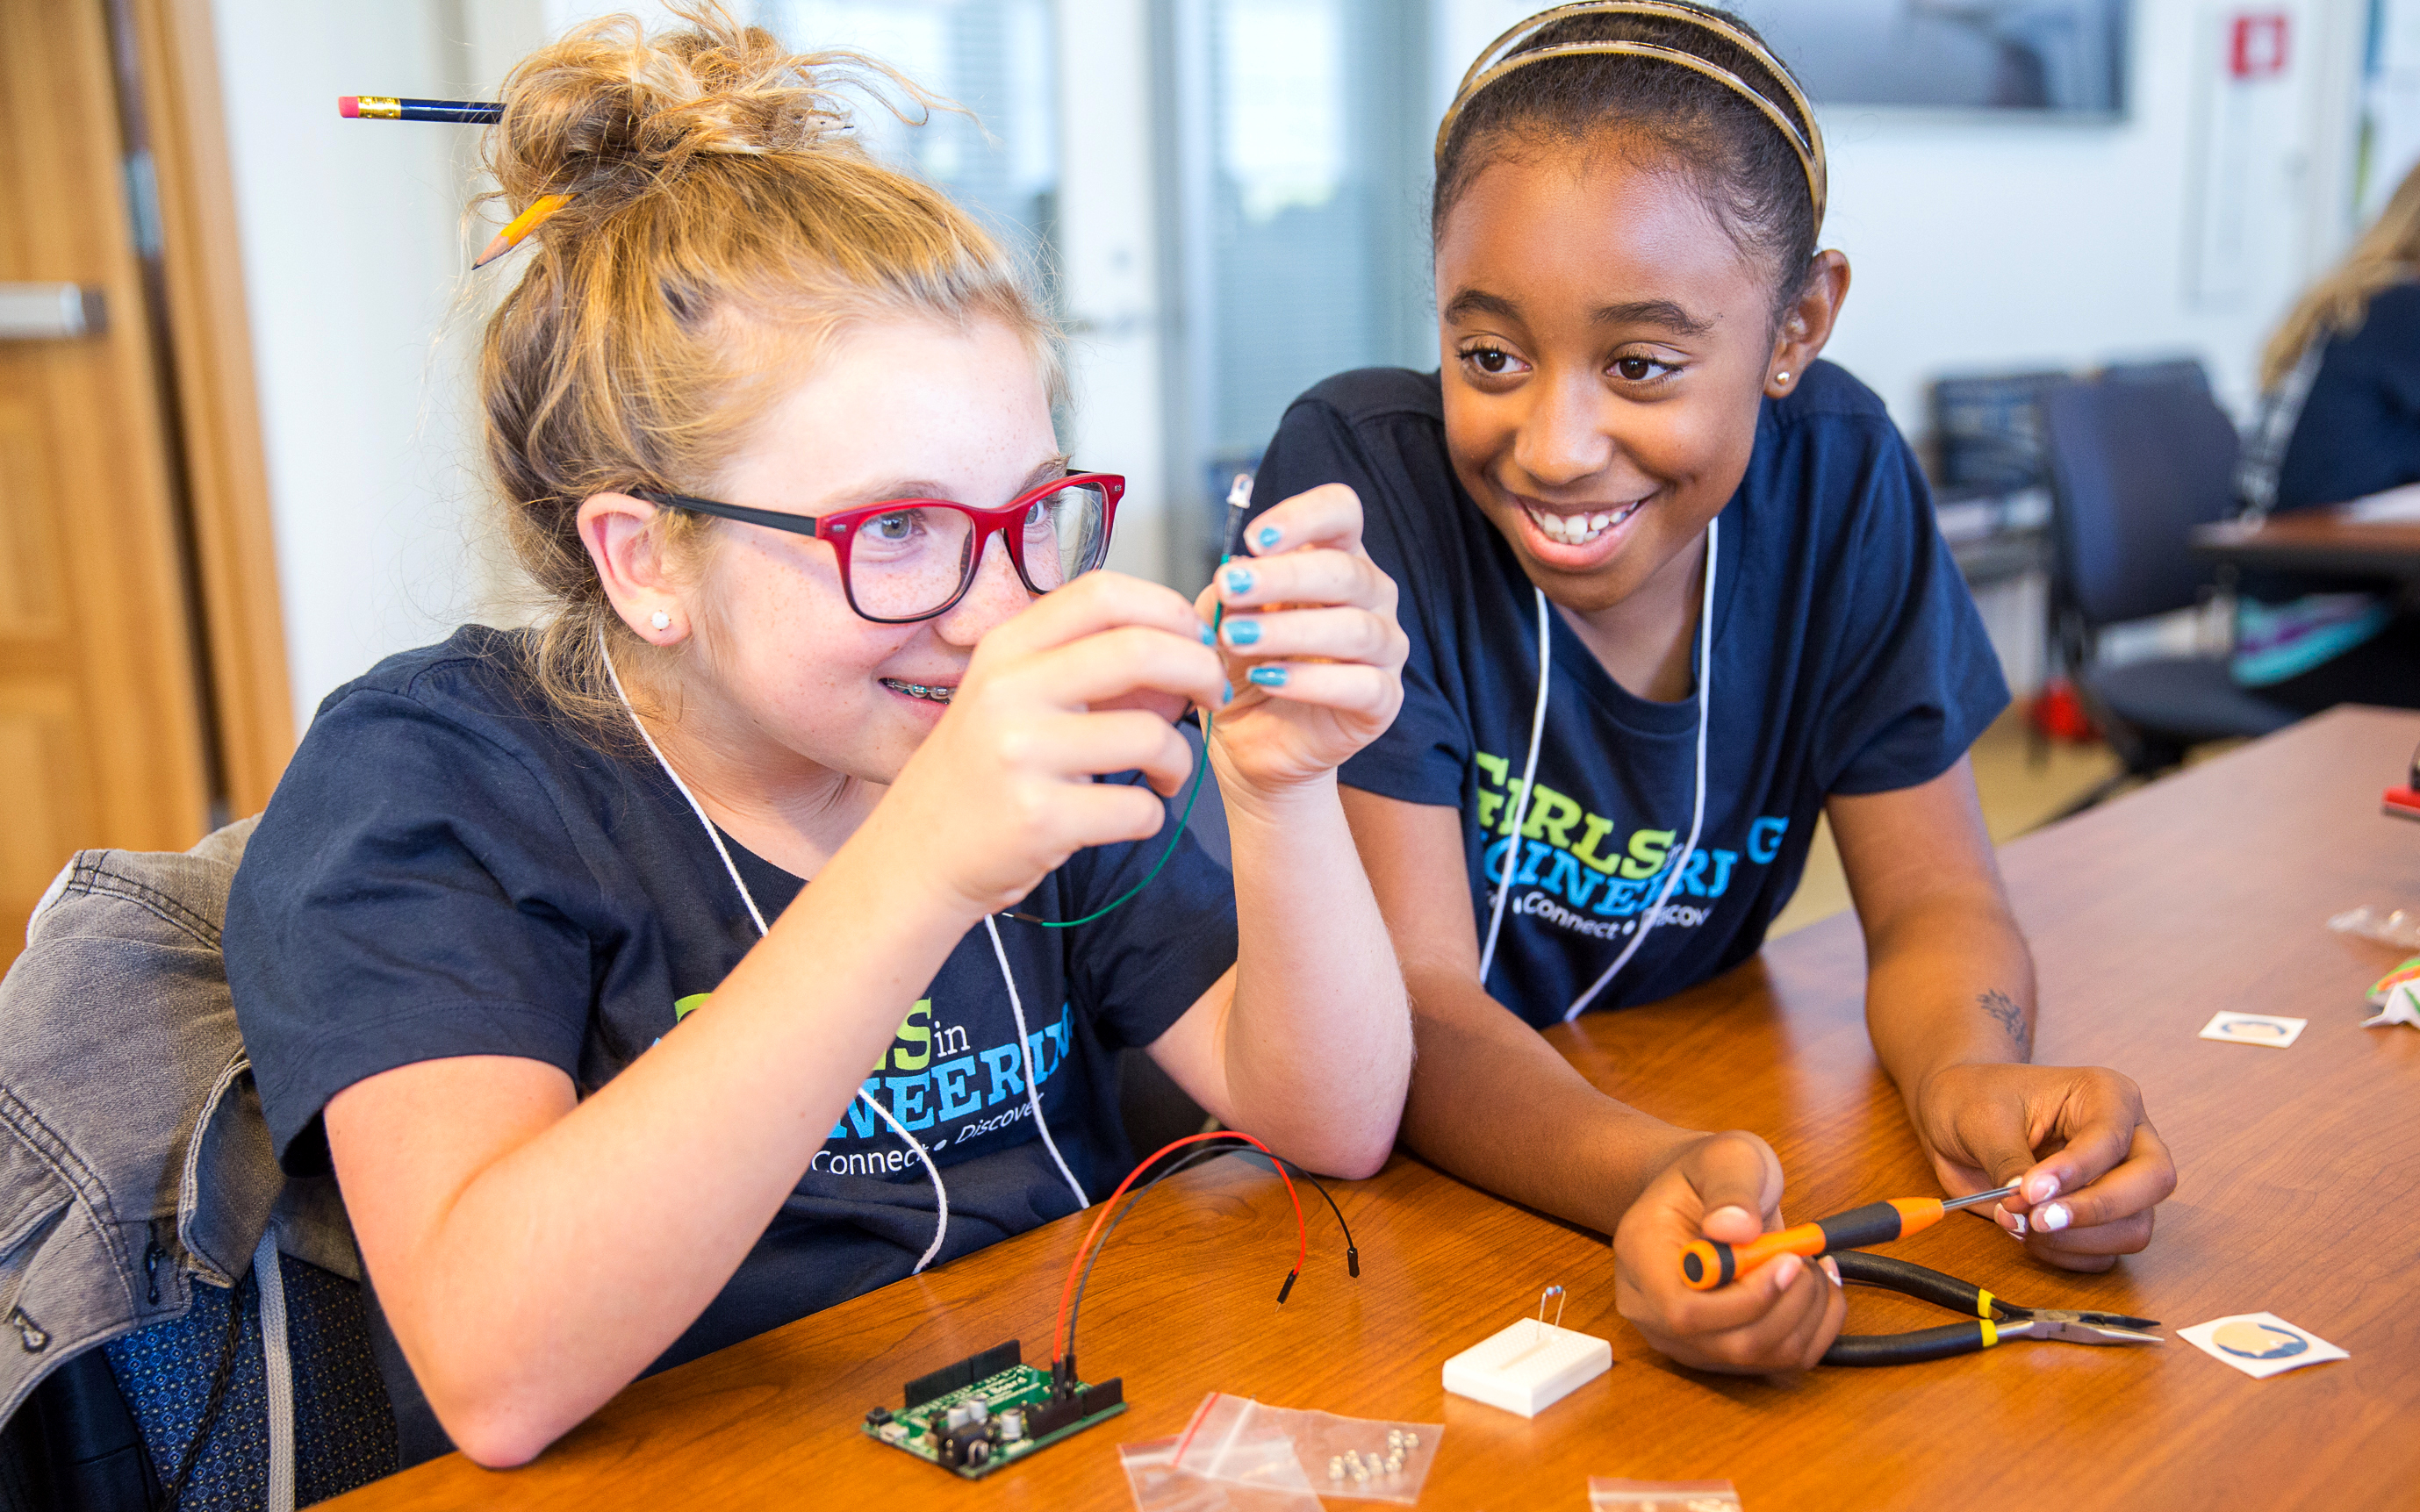 Two campers working with wires and a circuit board